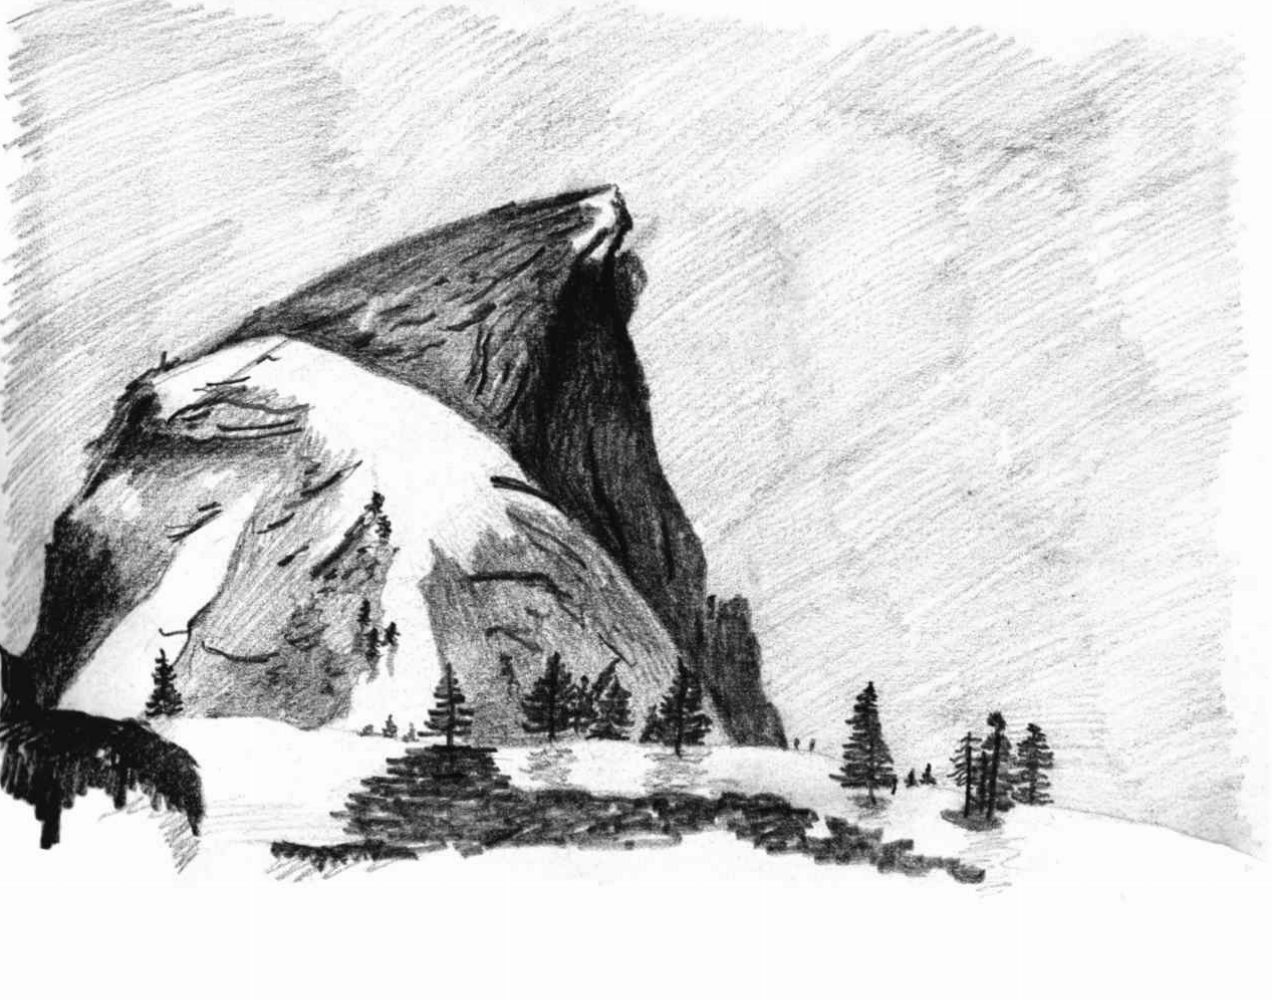 Charcoal drawing of Half Dome in Yosemite National Park